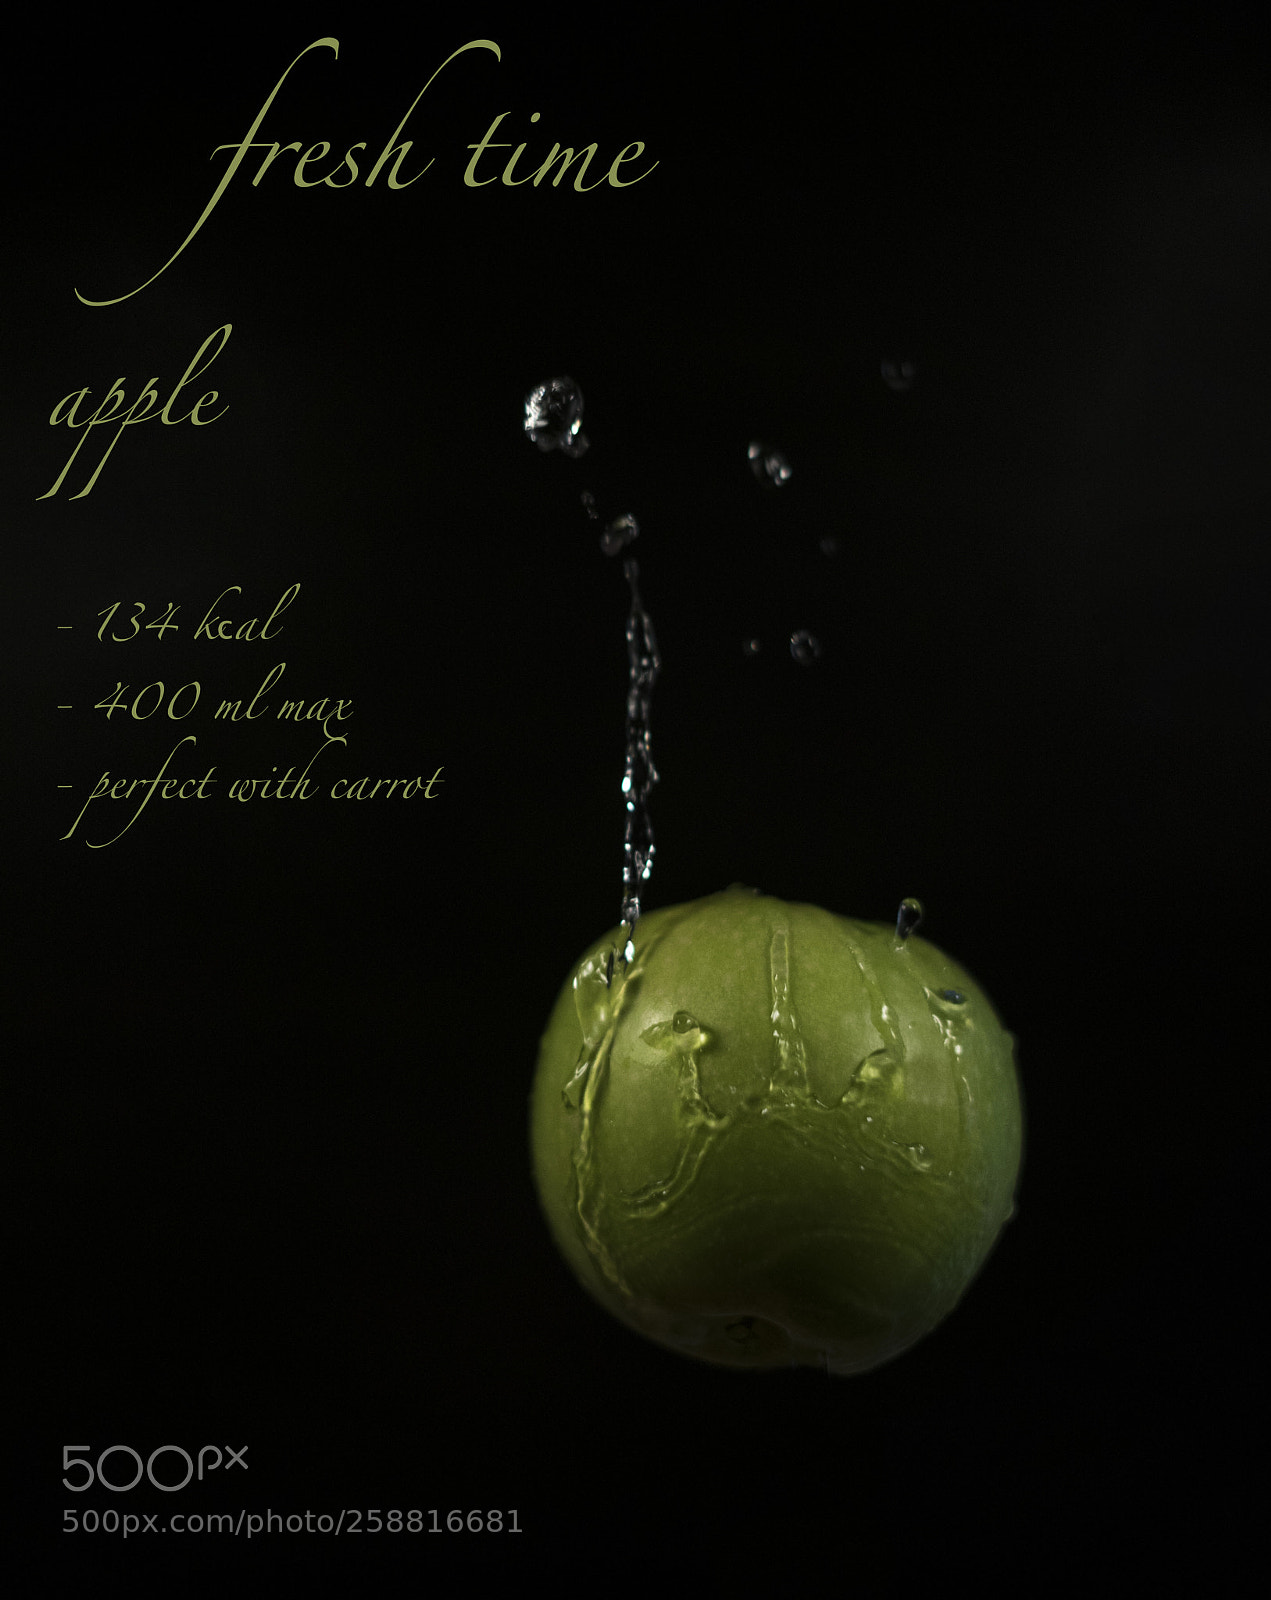 Sony a7 sample photo. Green apple with water photography